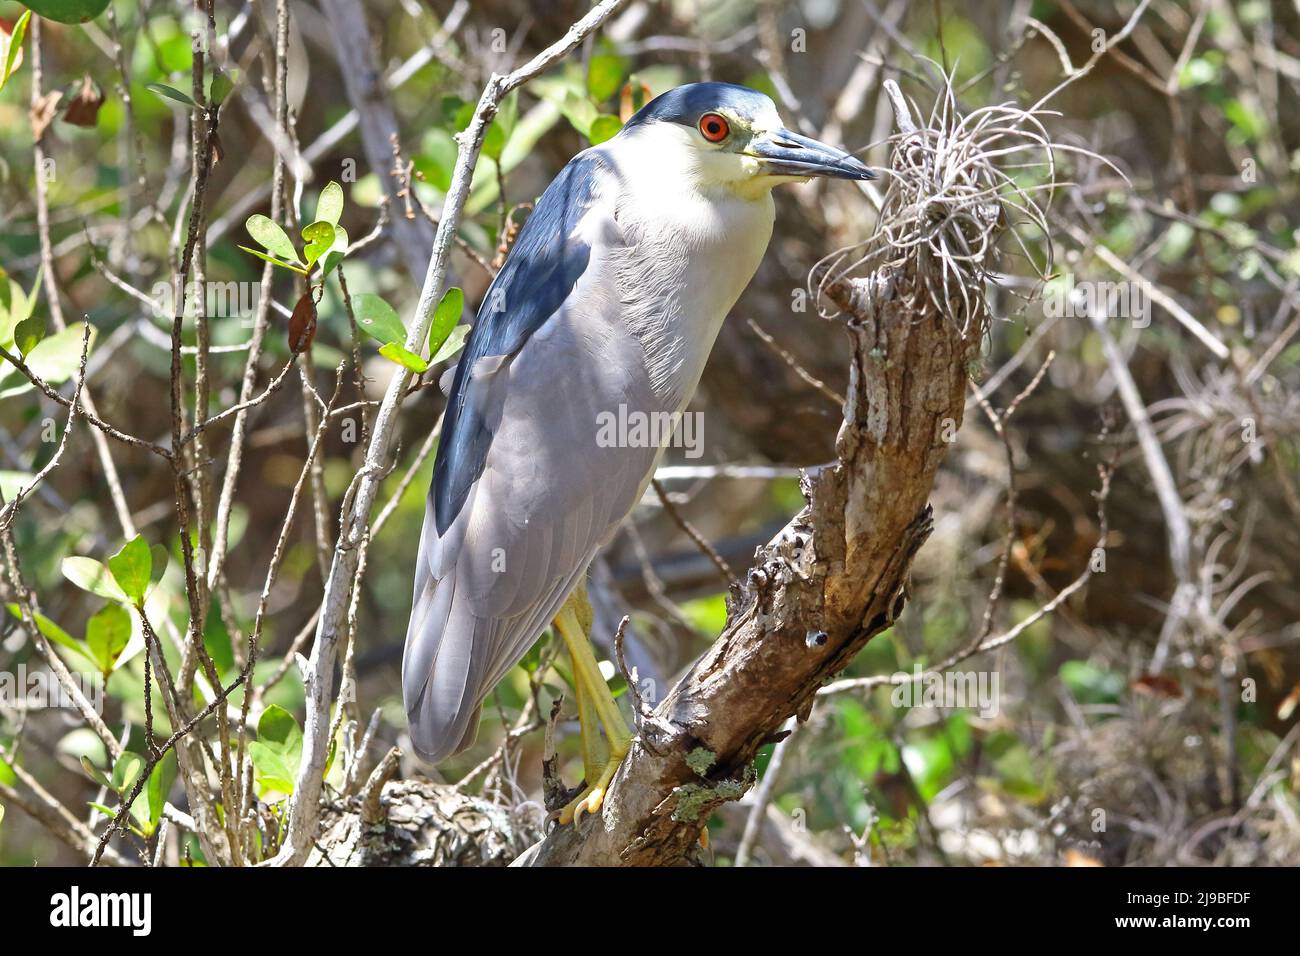 Black crowned night heron perched on a branch in the sunlight Stock Photo